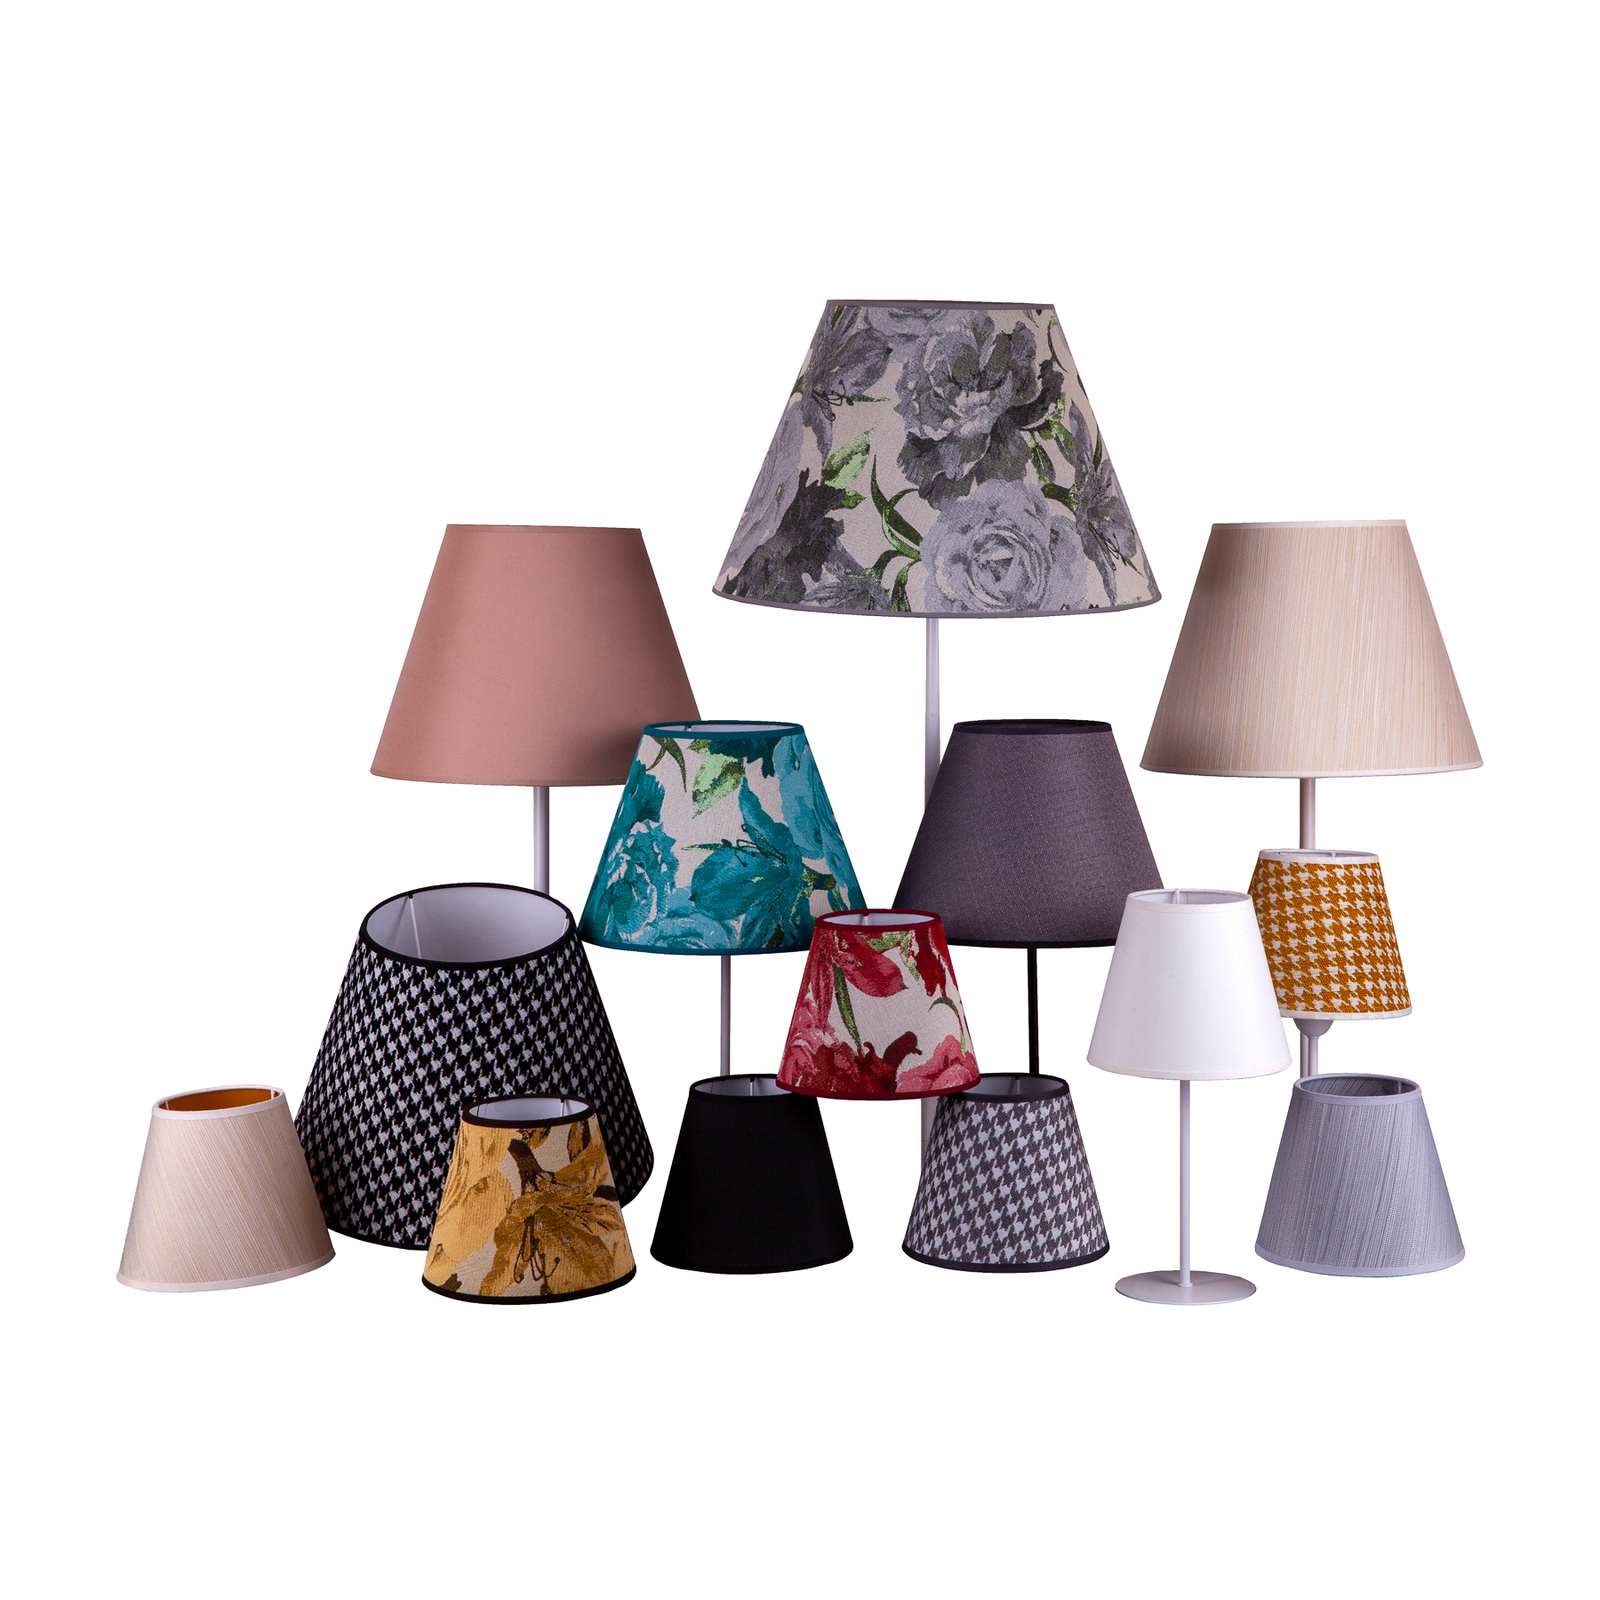 Sofia lampshade 15.5 cm houndstooth pattern yellow